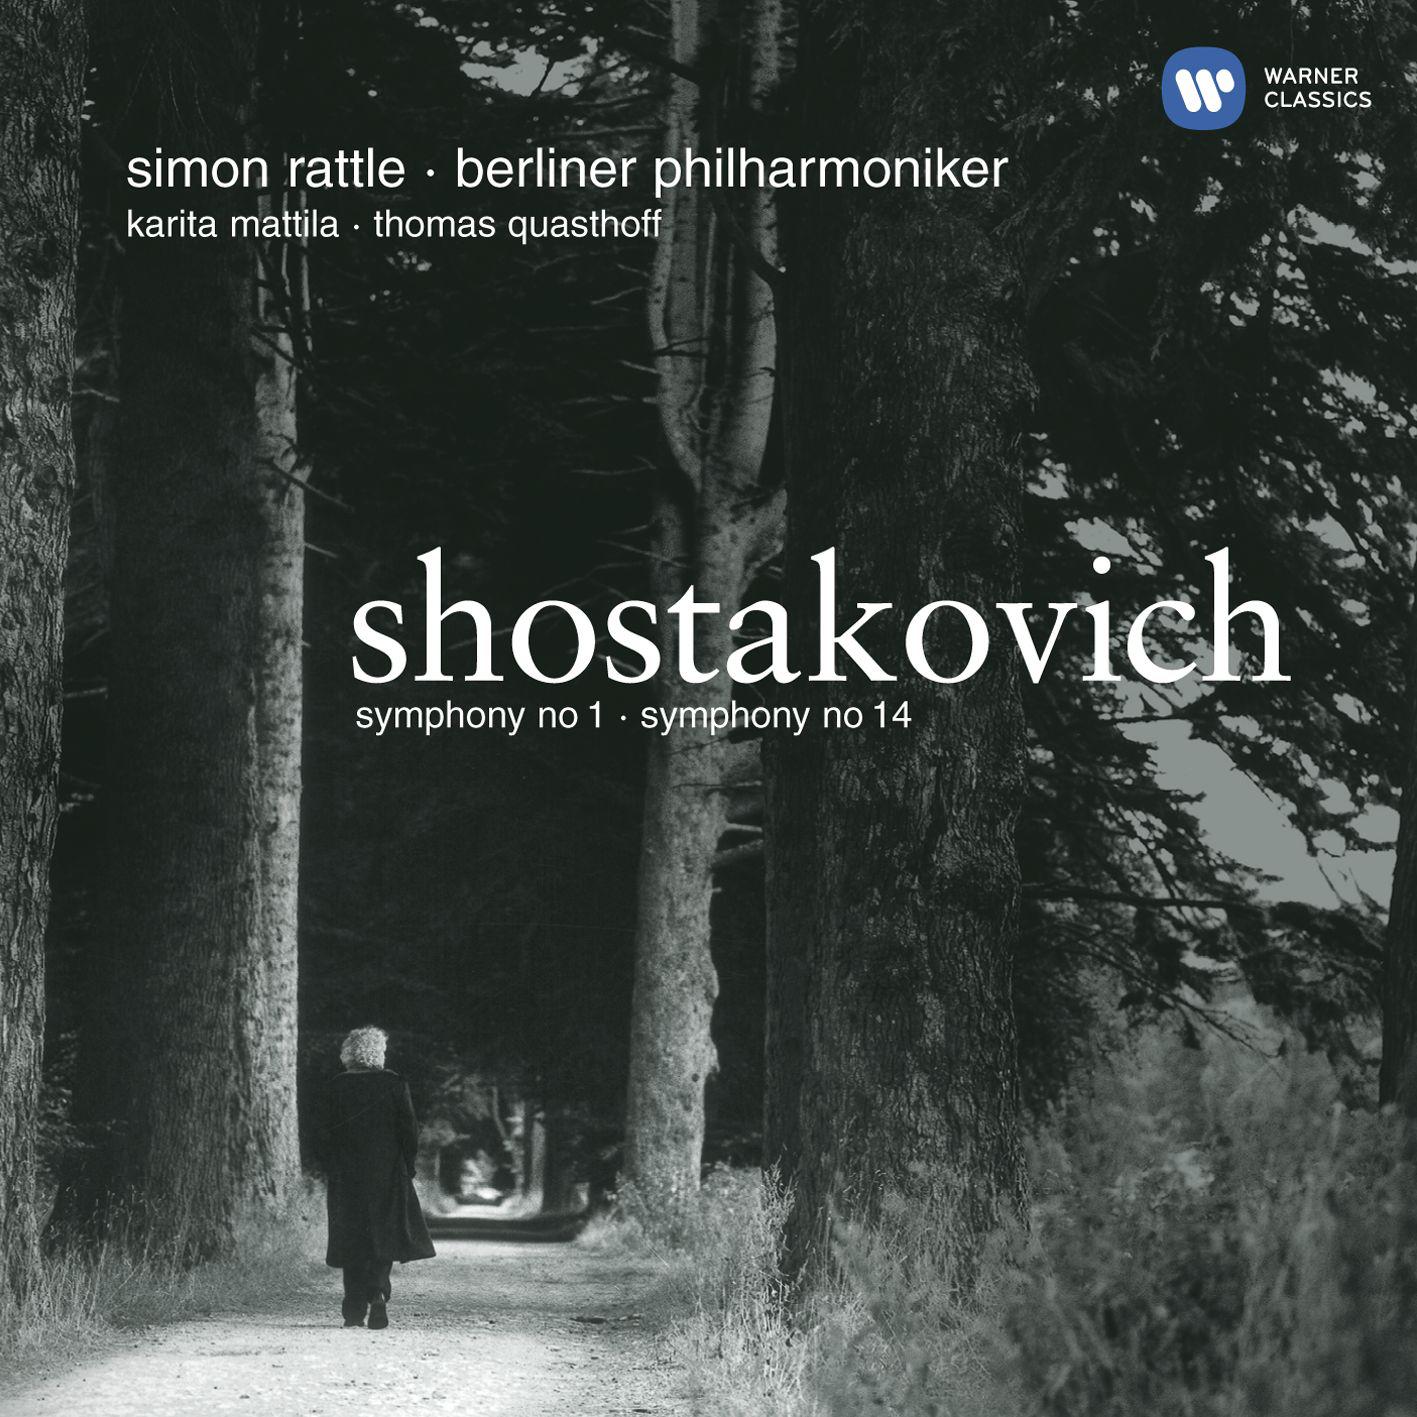 Symphony No. 14 in G Minor, Op. 135:V. On Watch